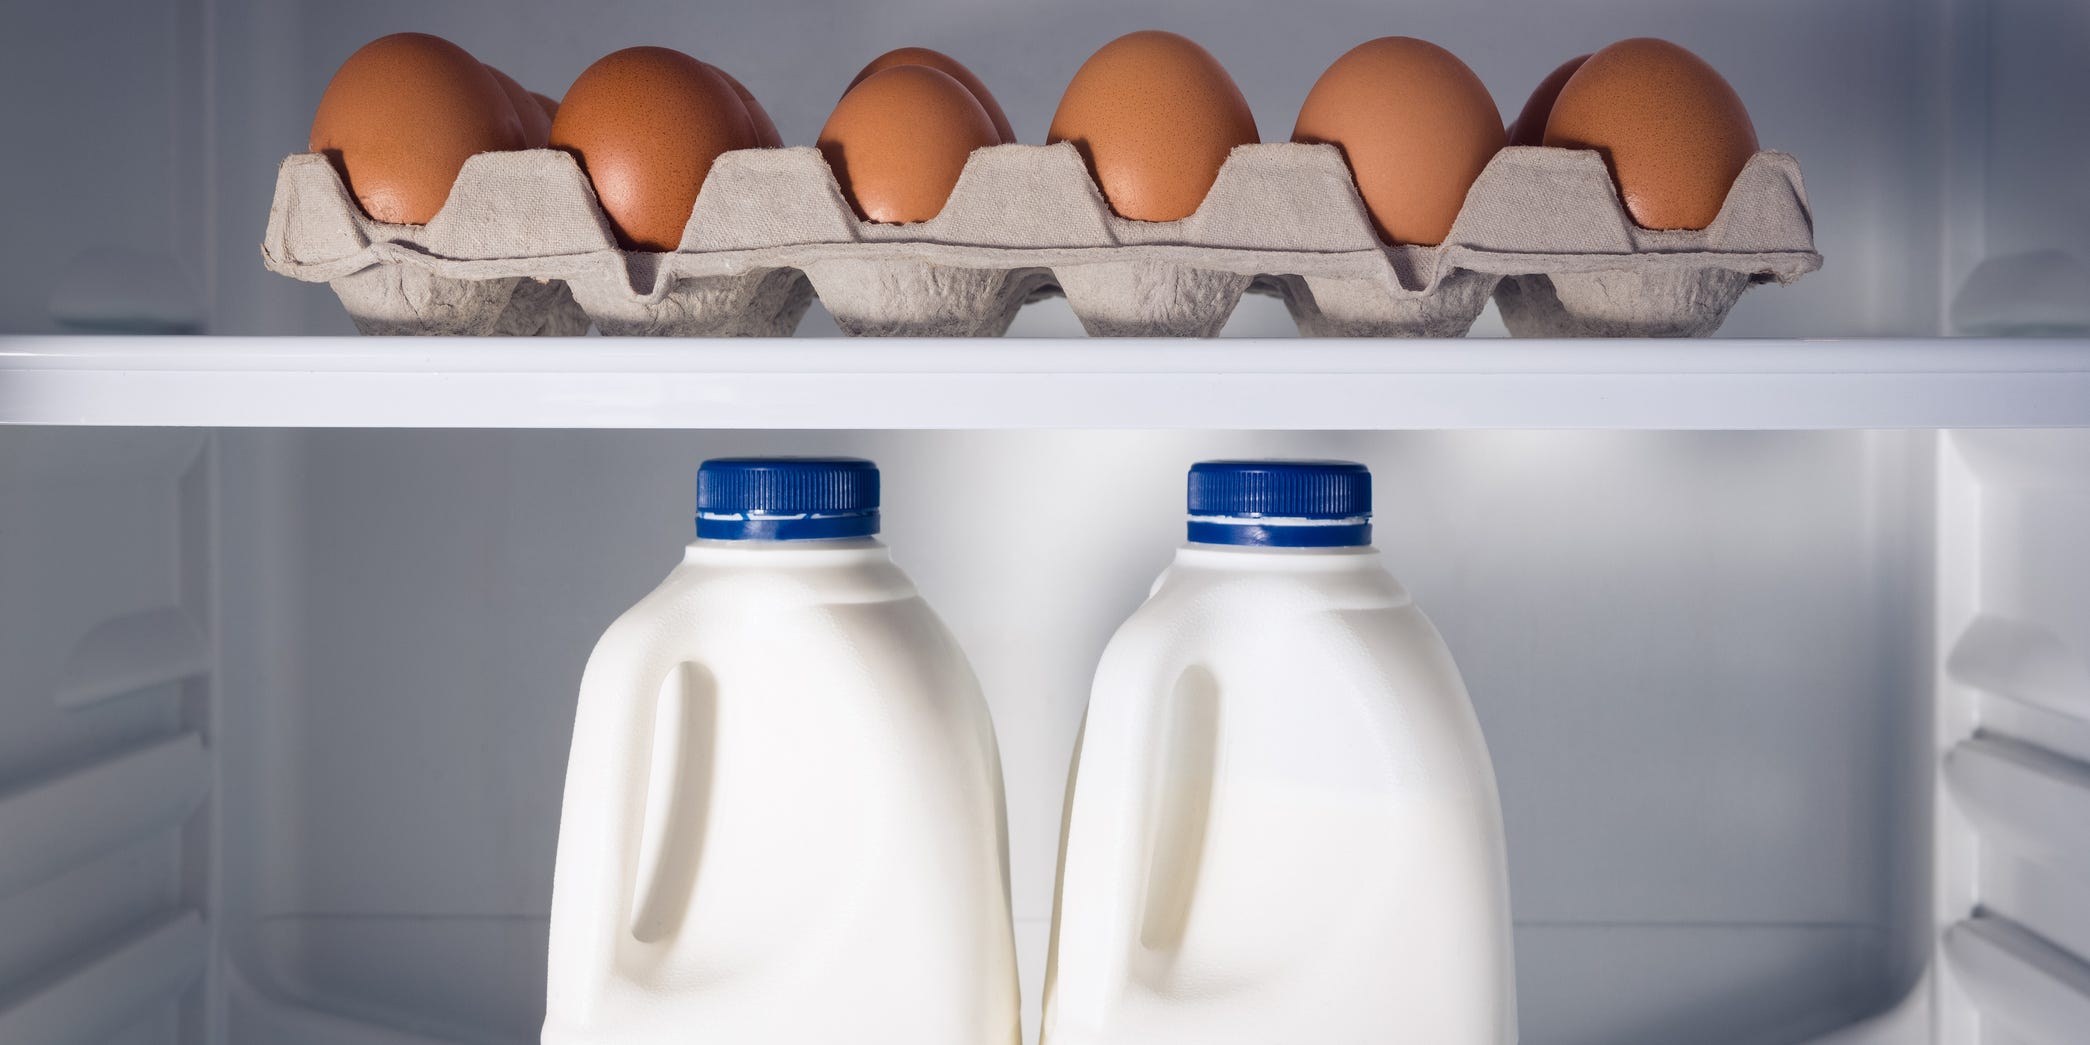 A carton of eggs and two bottles of milk inside of a refrigerator